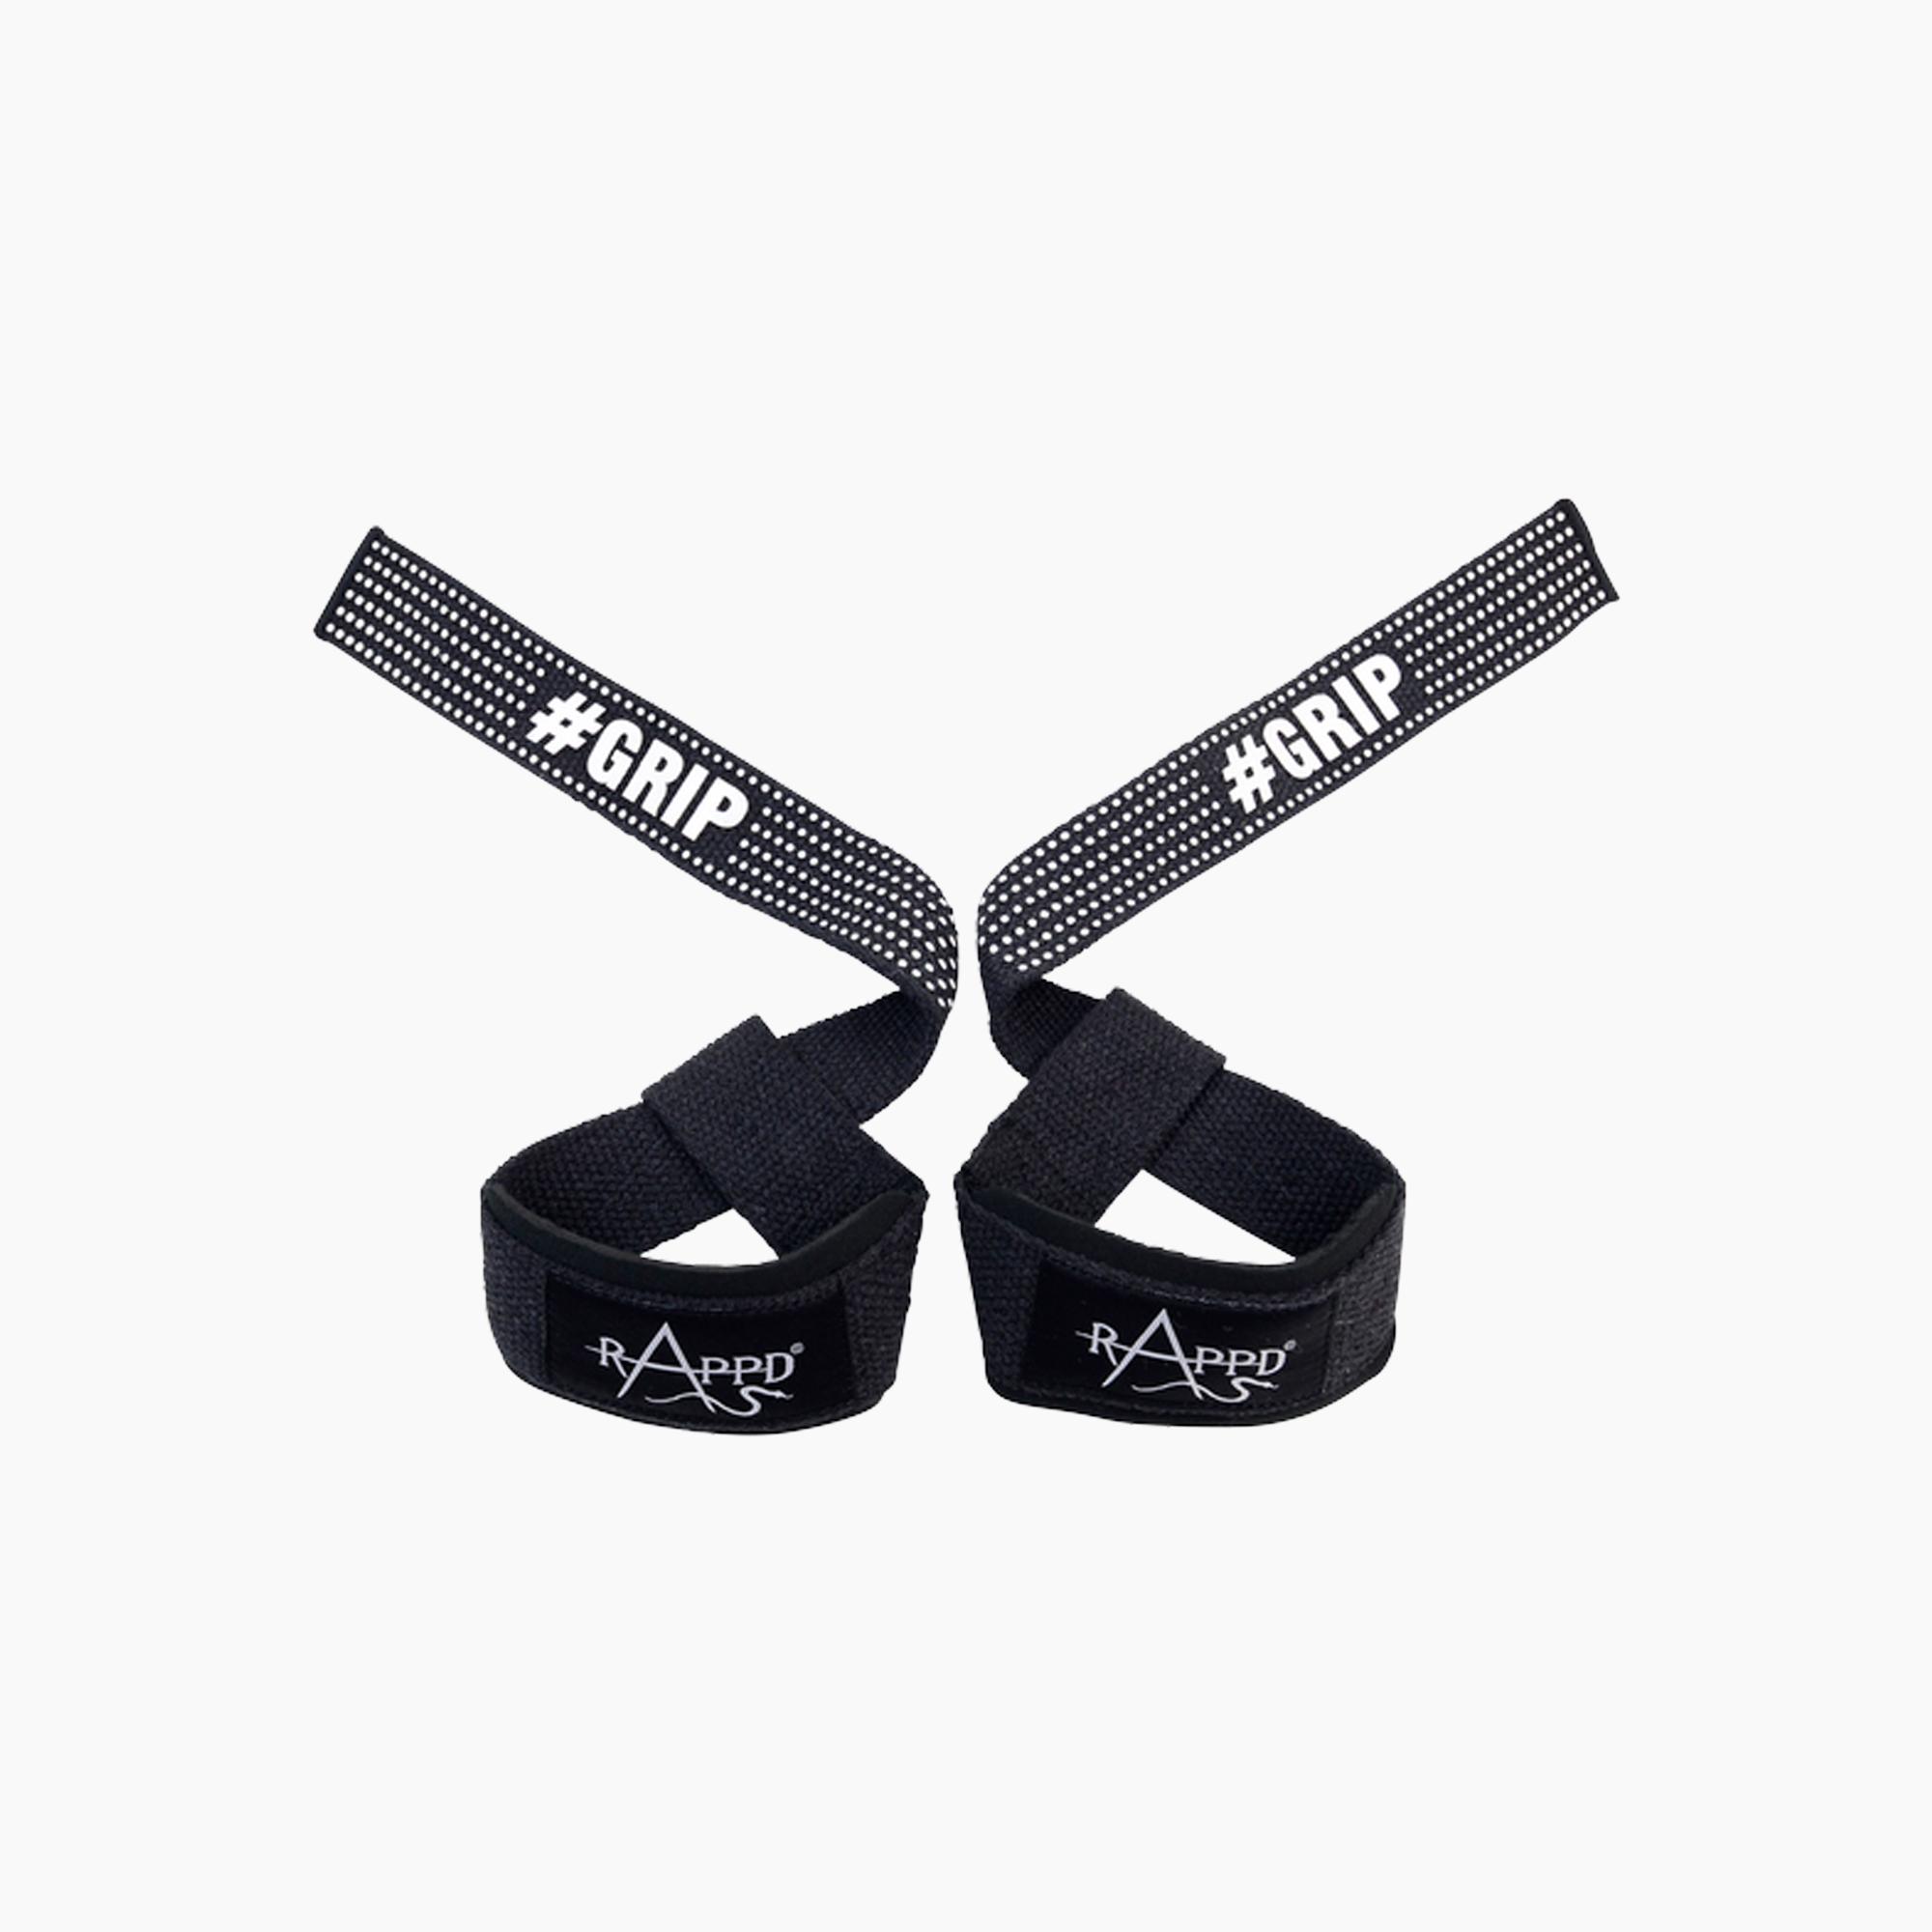 Strong Lifting Straps, Rappd Lifting Straps